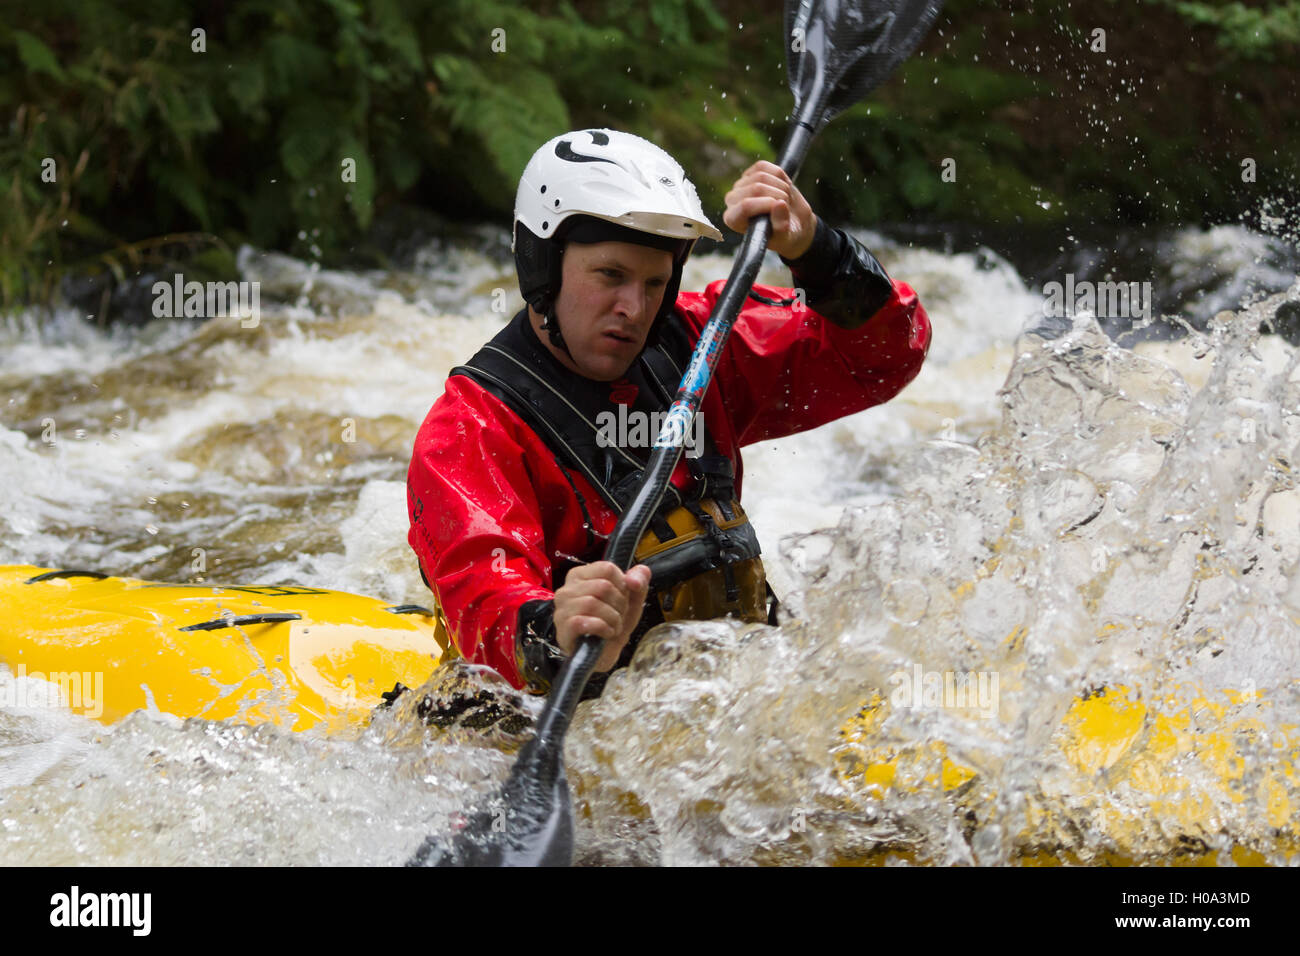 Acqua Bianca kayaker paddling attraverso rapids presso il National White Water centro sul fiume Tryweryn Frongoch Galles del Nord Foto Stock